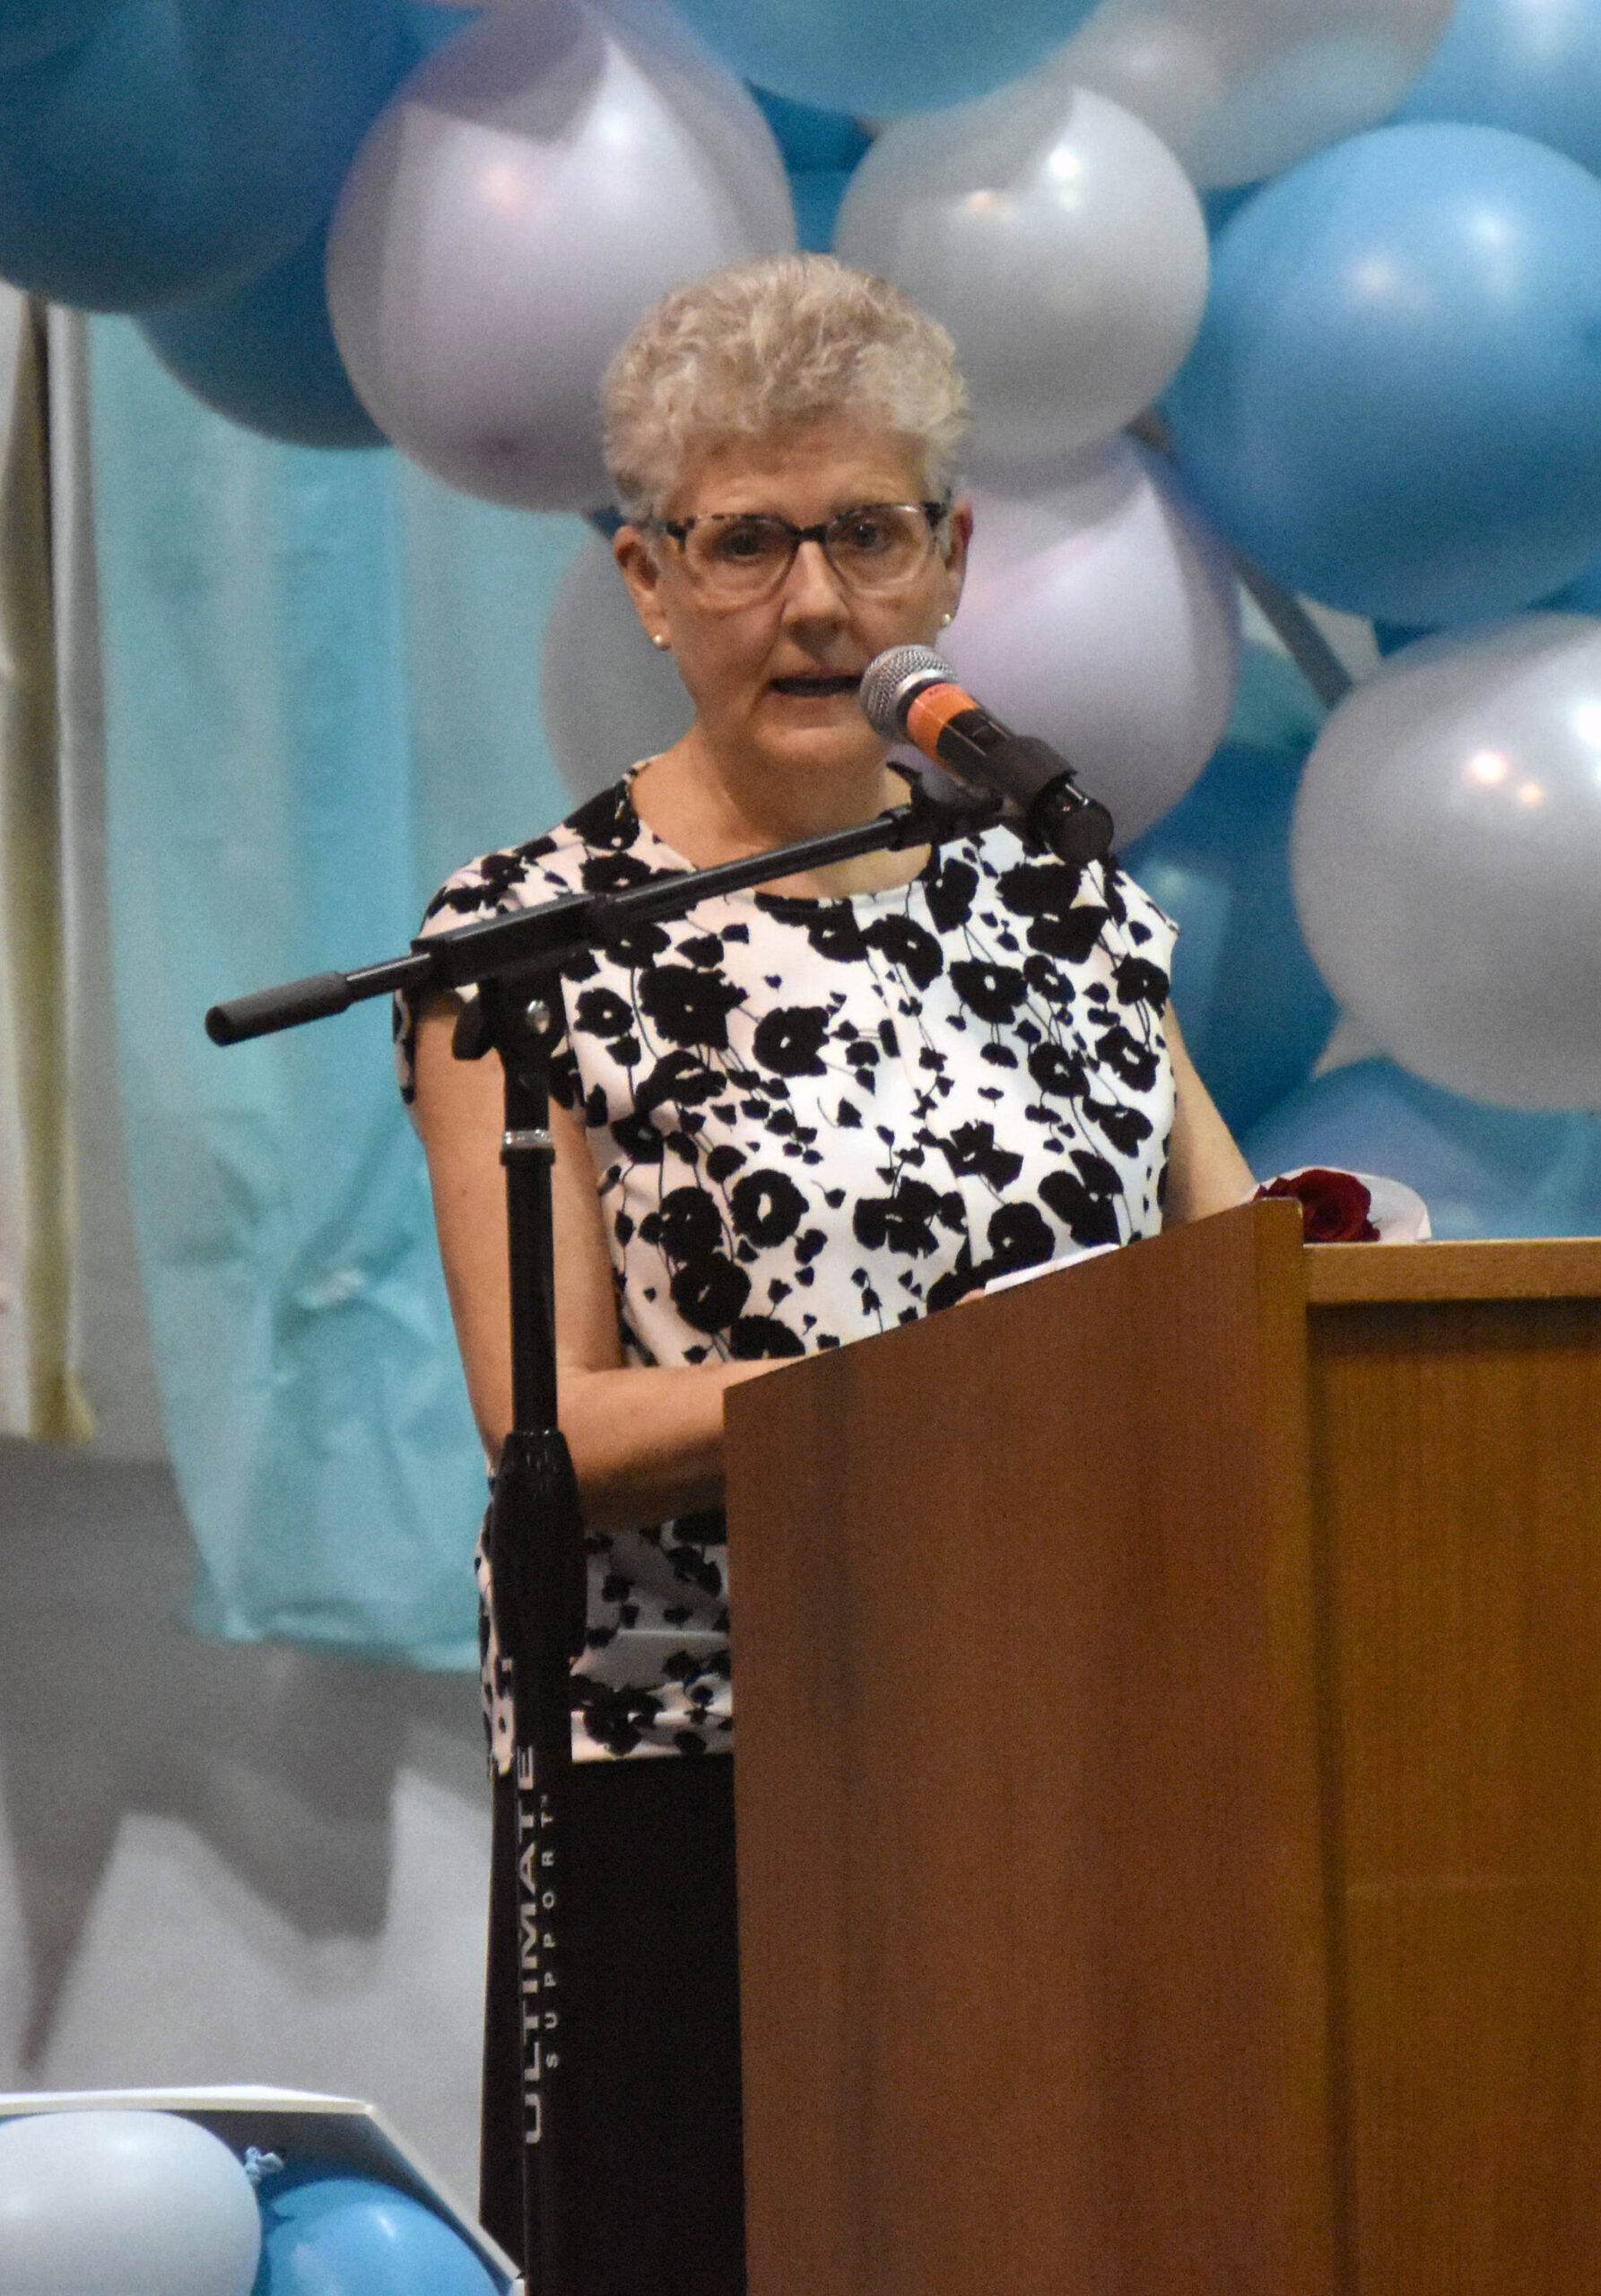 LaDawn Druce, school counselor at River City Academy, was the guest speaker at the River City Academy graduation Wednesday, May 17, 2023, at River City Academy inside Skyview Middle School just outside of Soldotna, Alaska. (Photo by Jeff Helminiak/Peninsula Clarion)